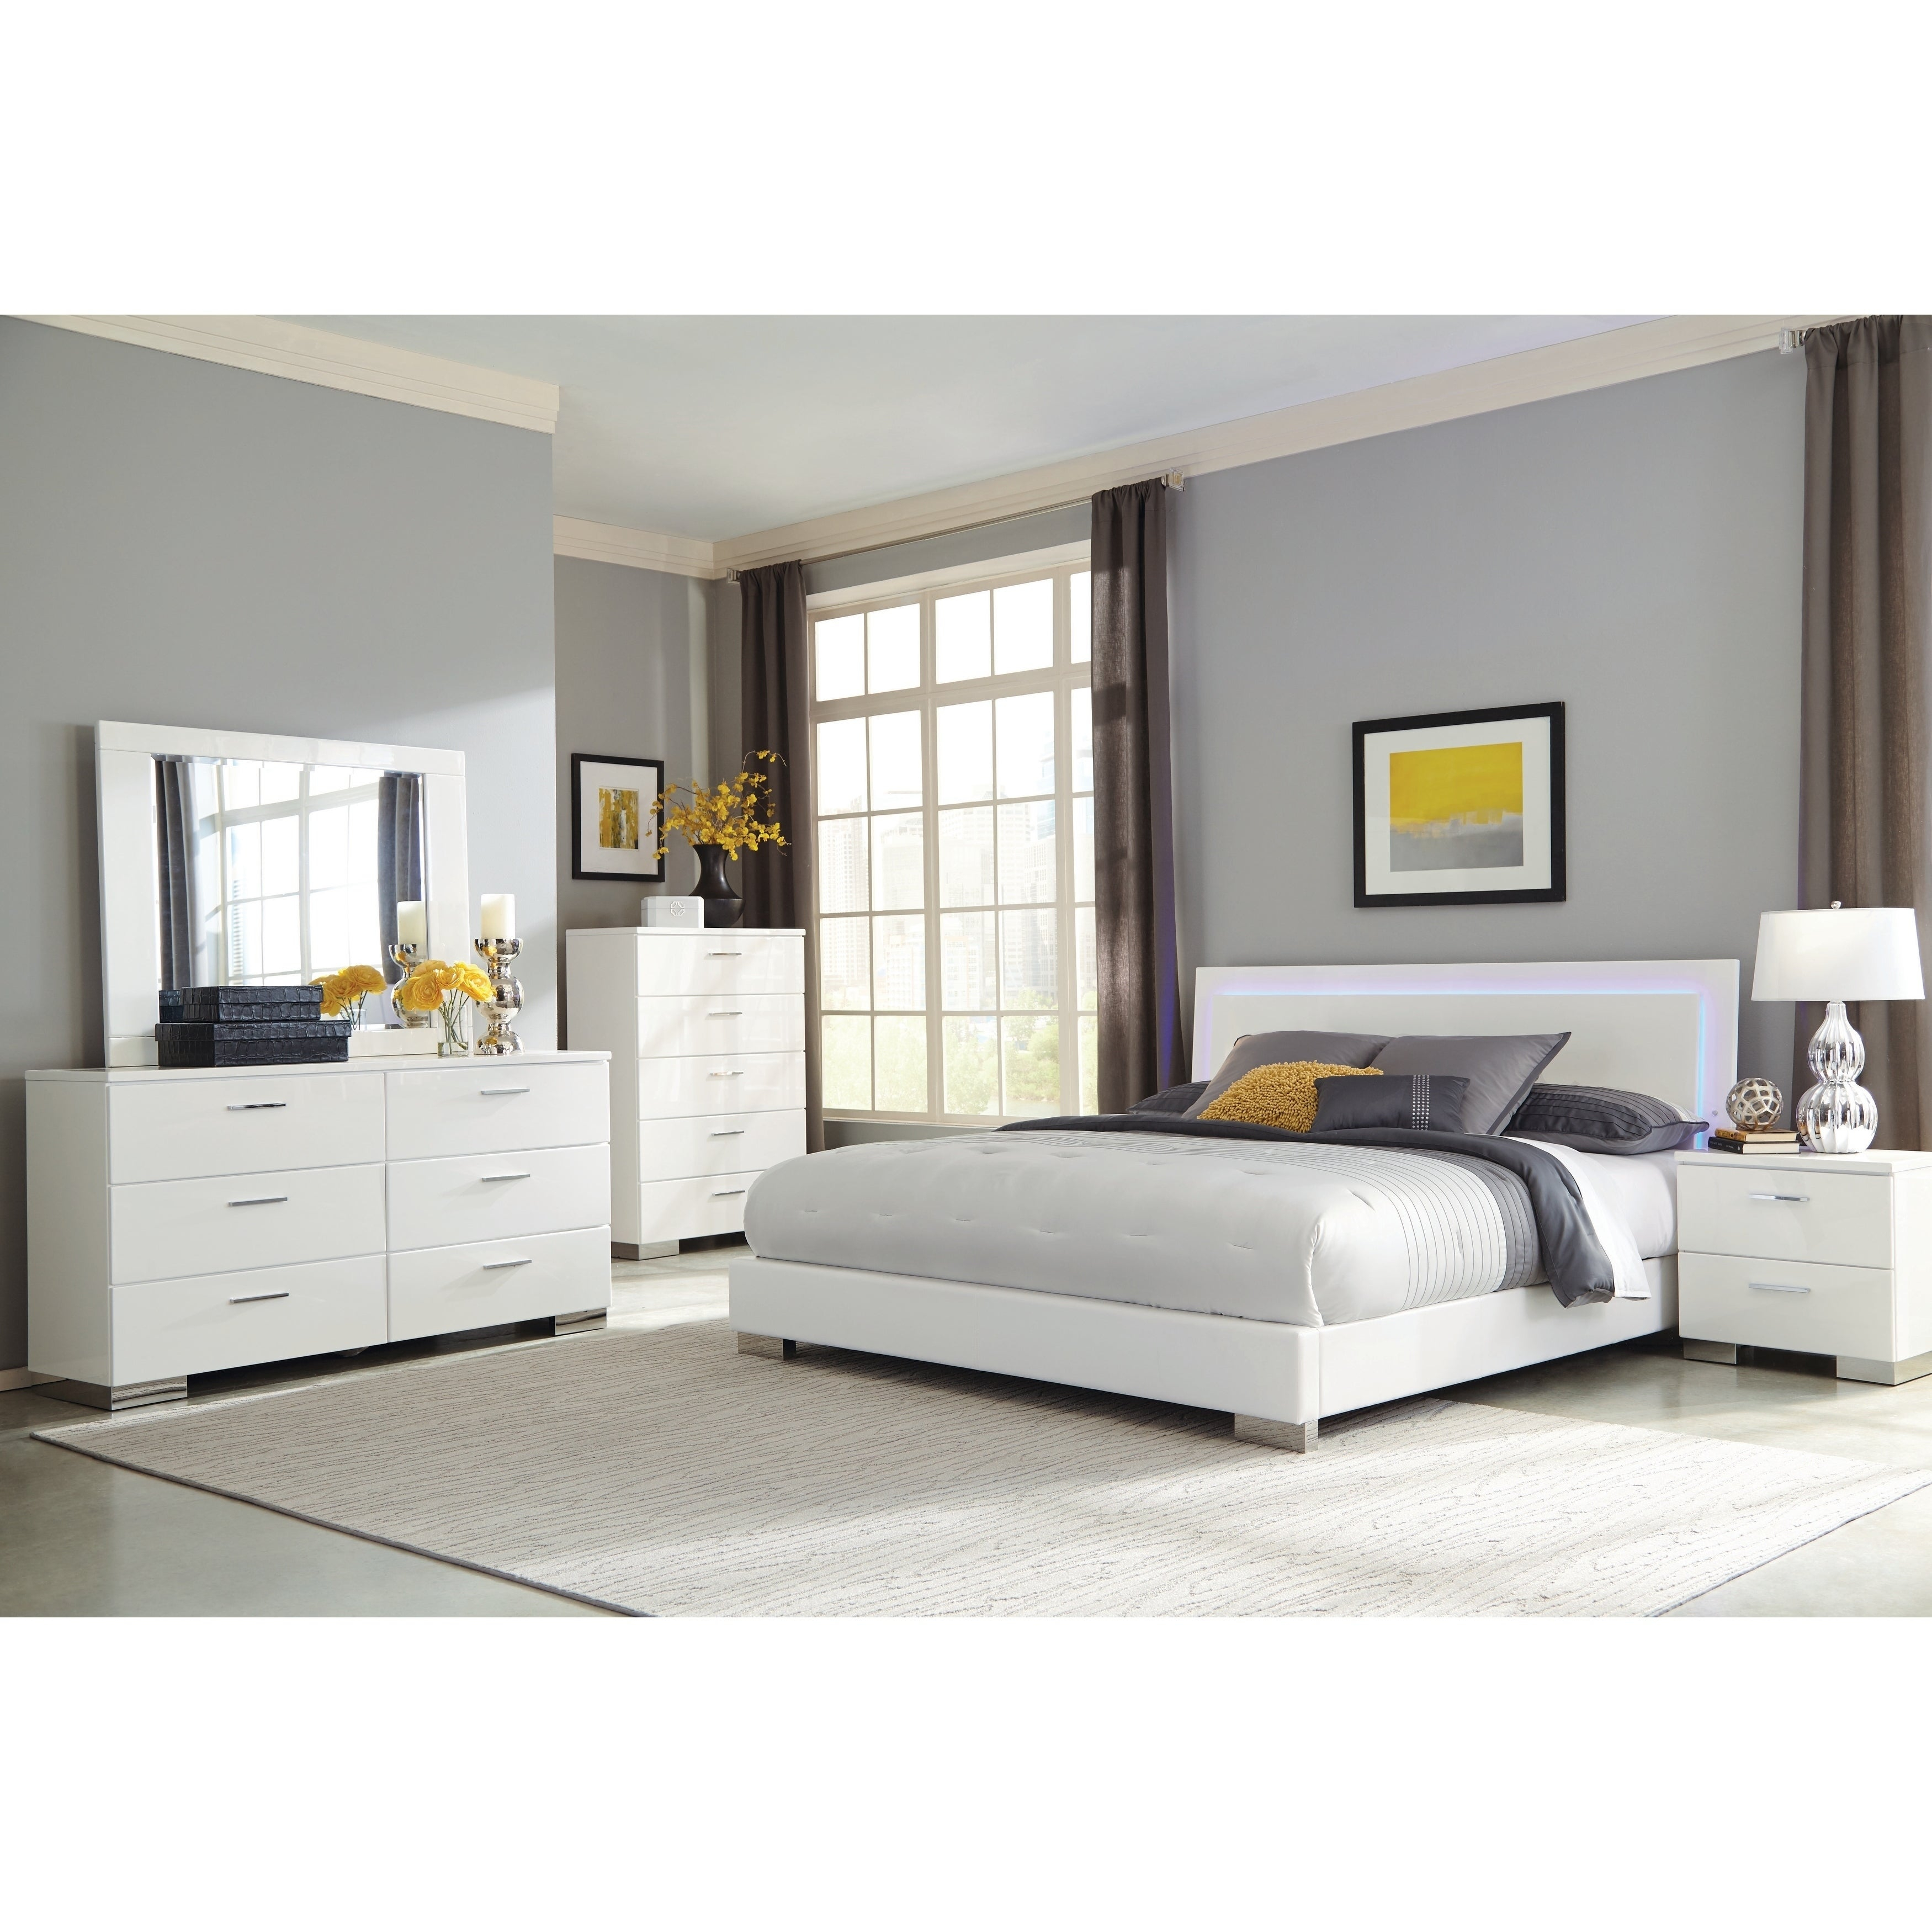 Strick Bolton Alice White 4 Piece Bedroom Set With Led Headboard within size 3500 X 3500